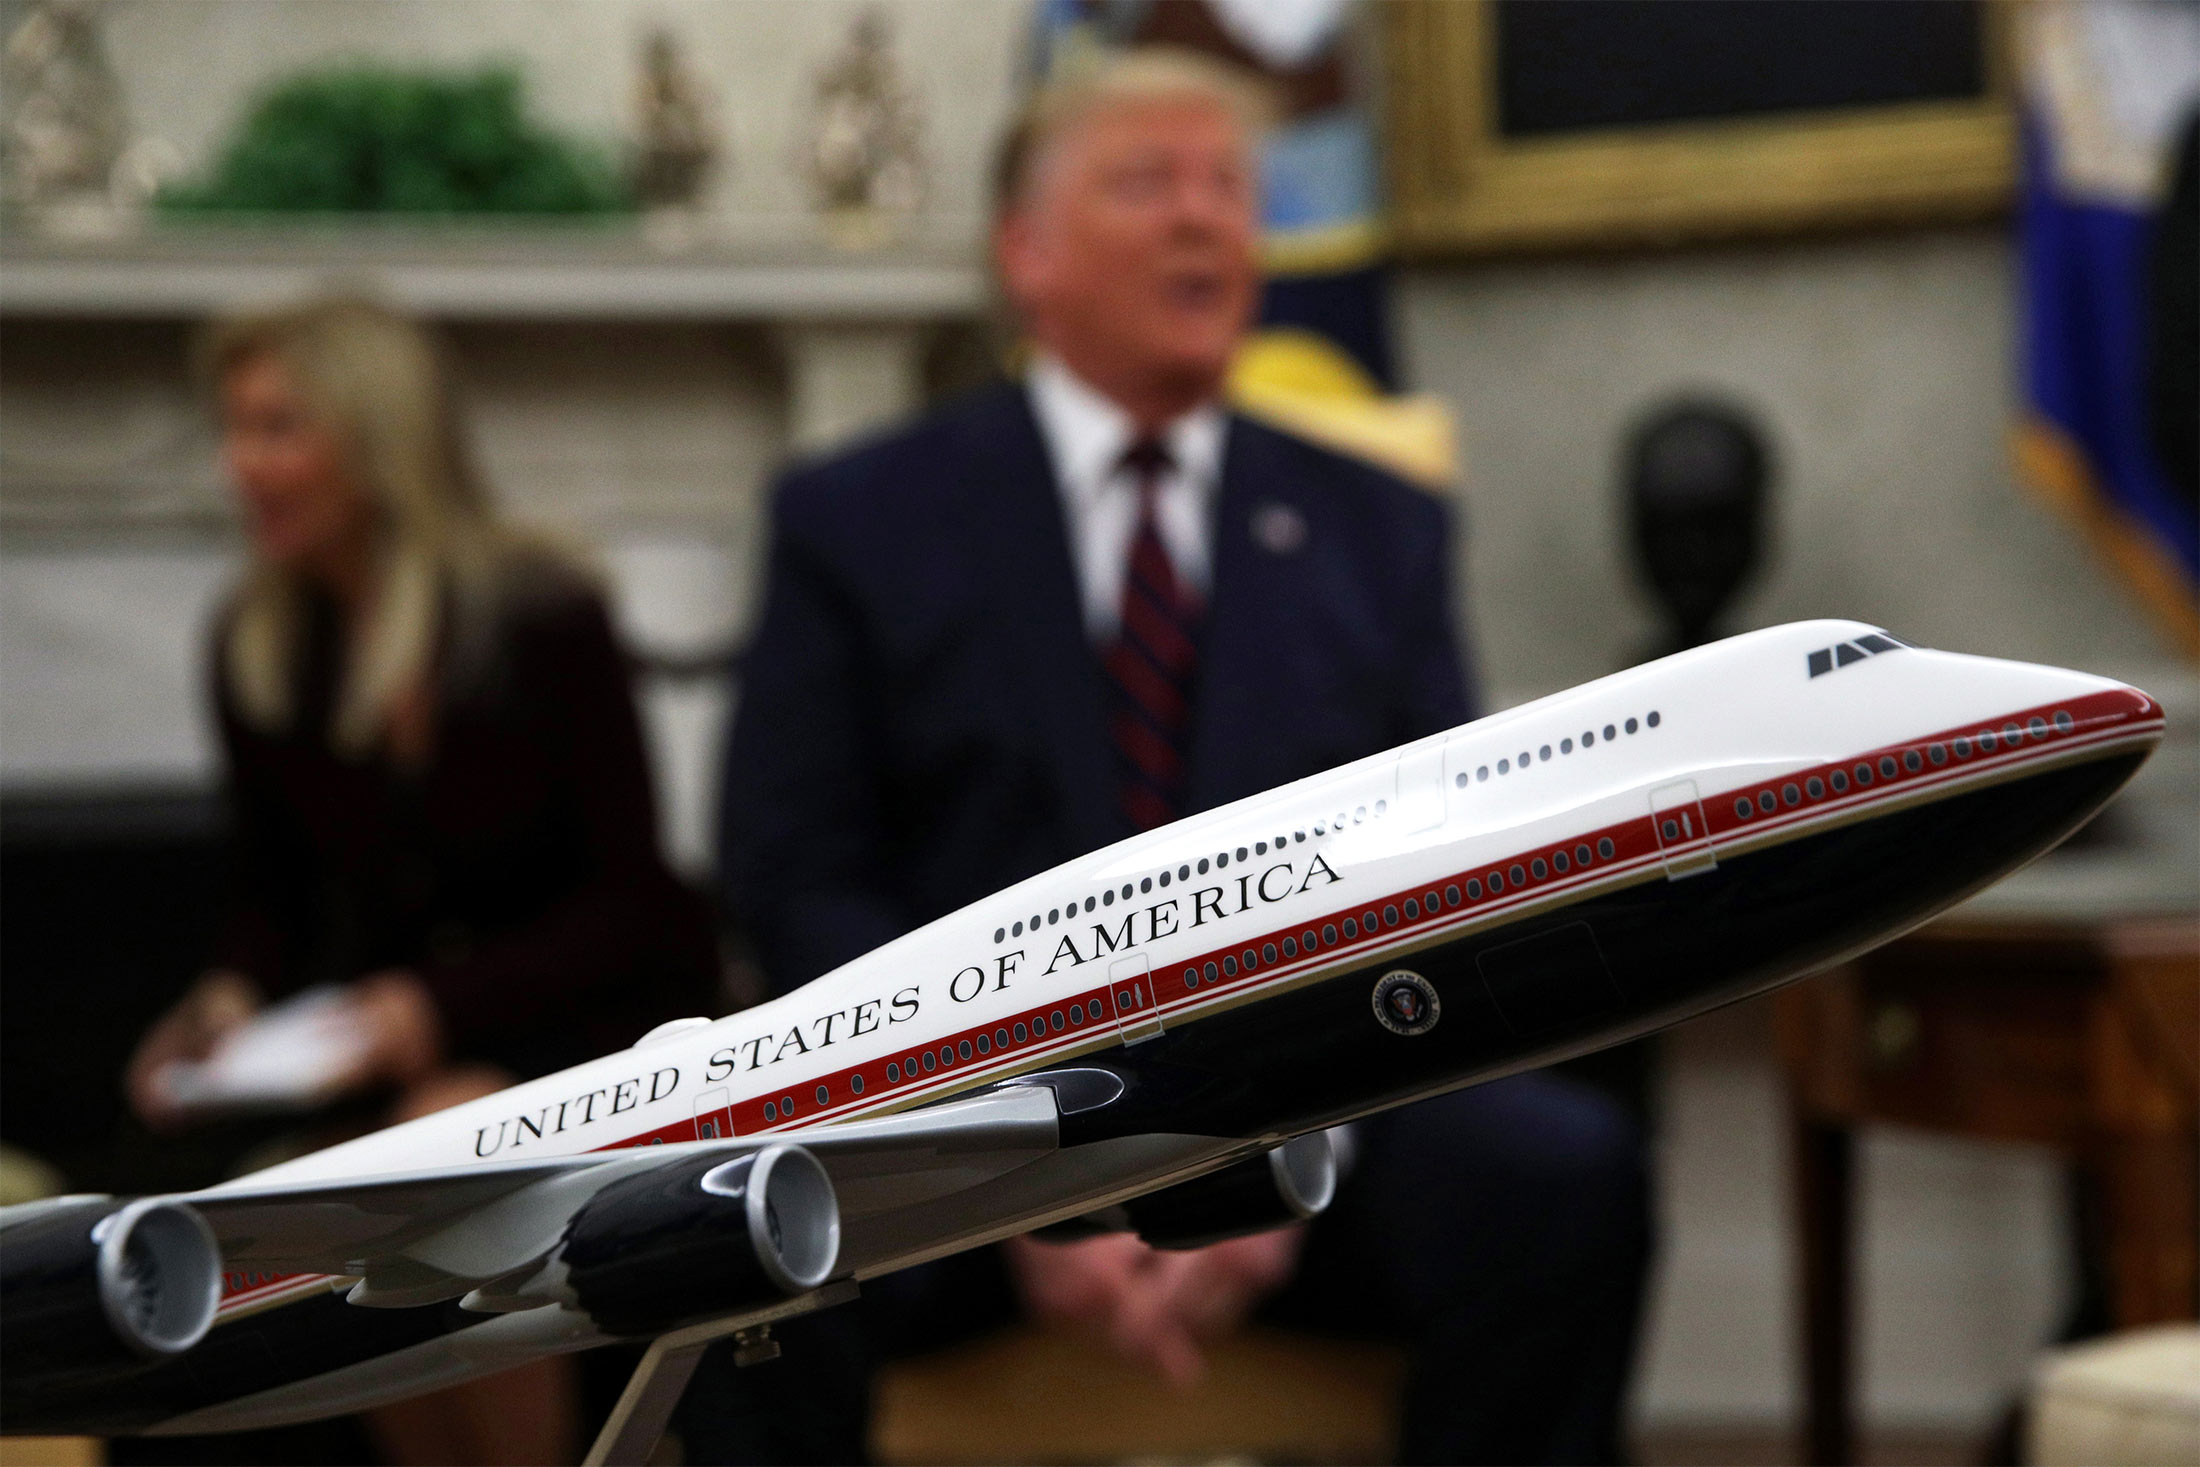 US President Biden selects livery for 'Next Air Force One', News